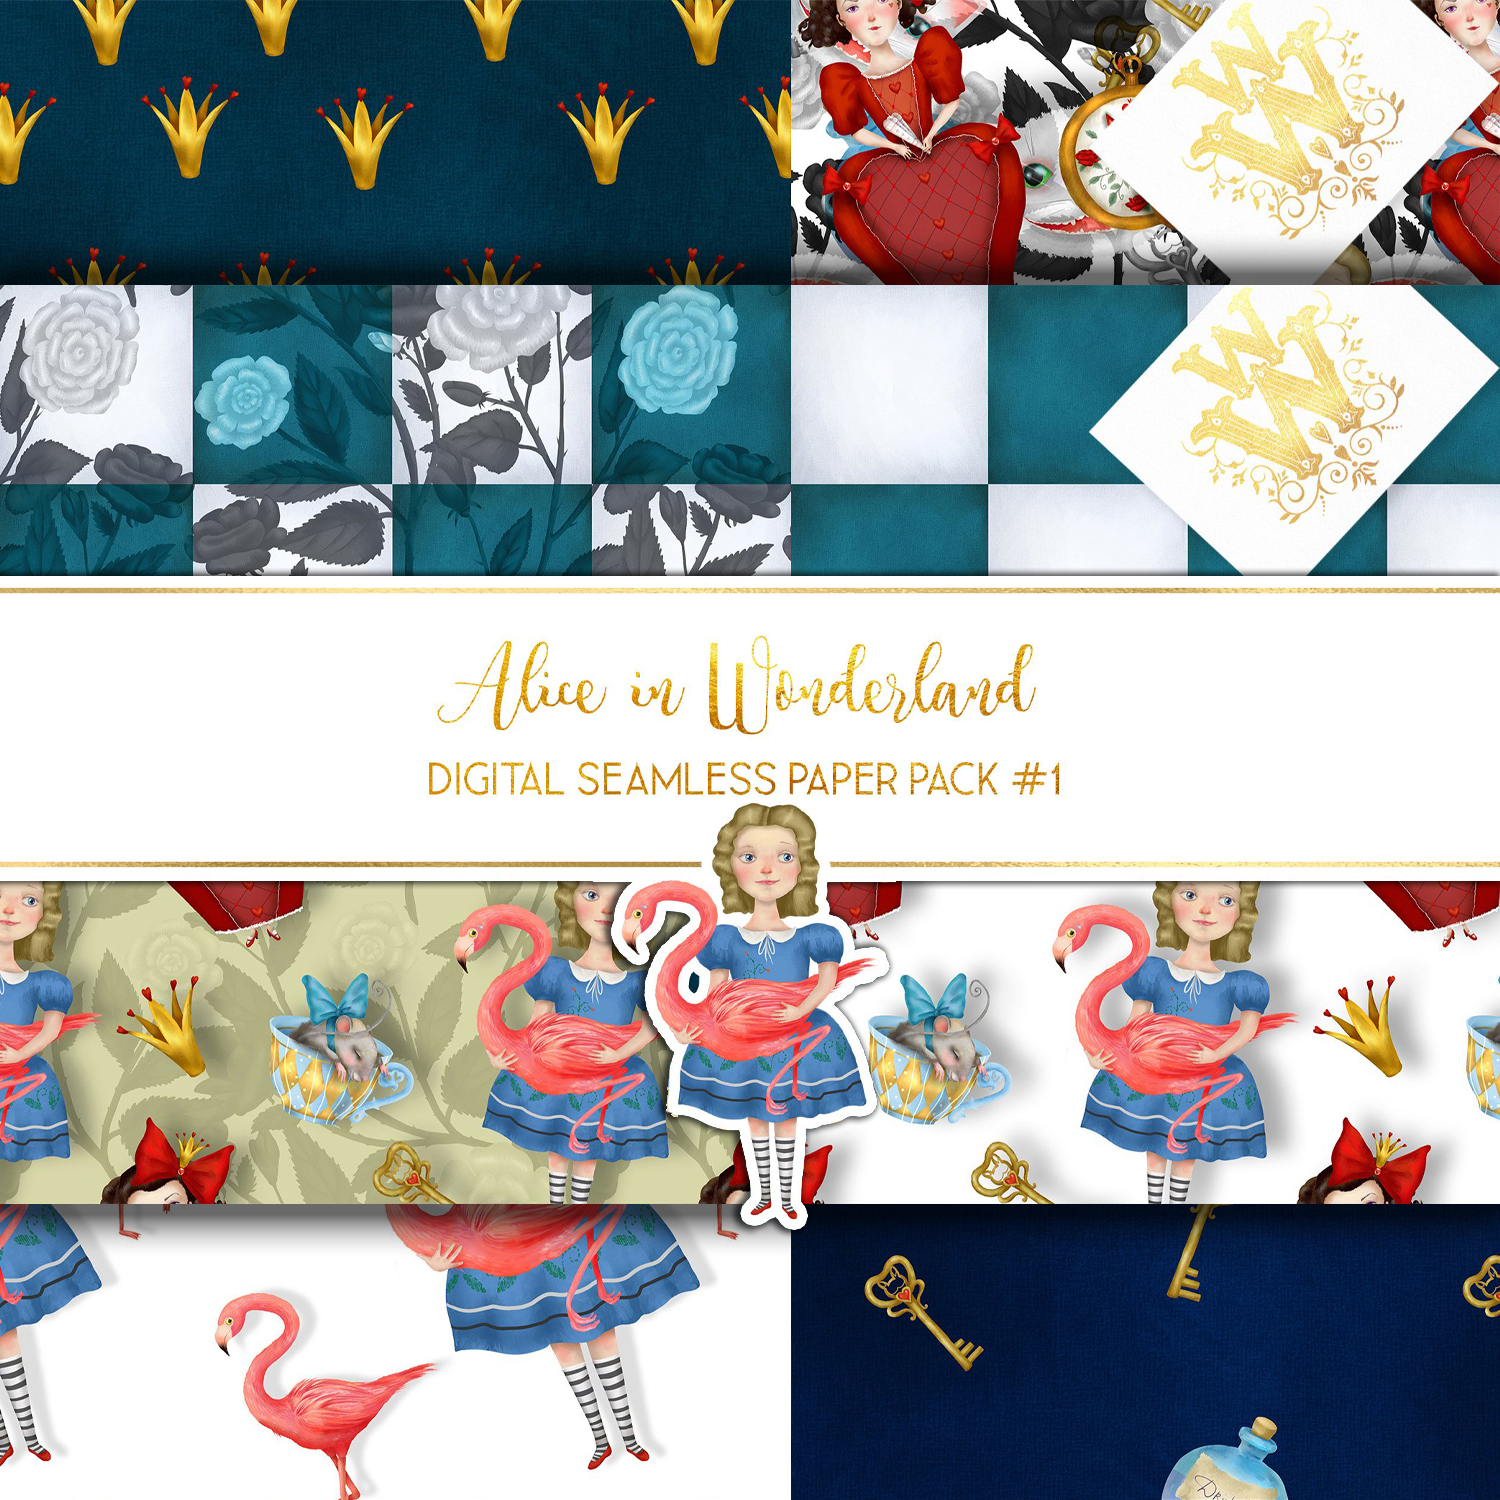 Preview alice in wonderland digital paper pack chess board.